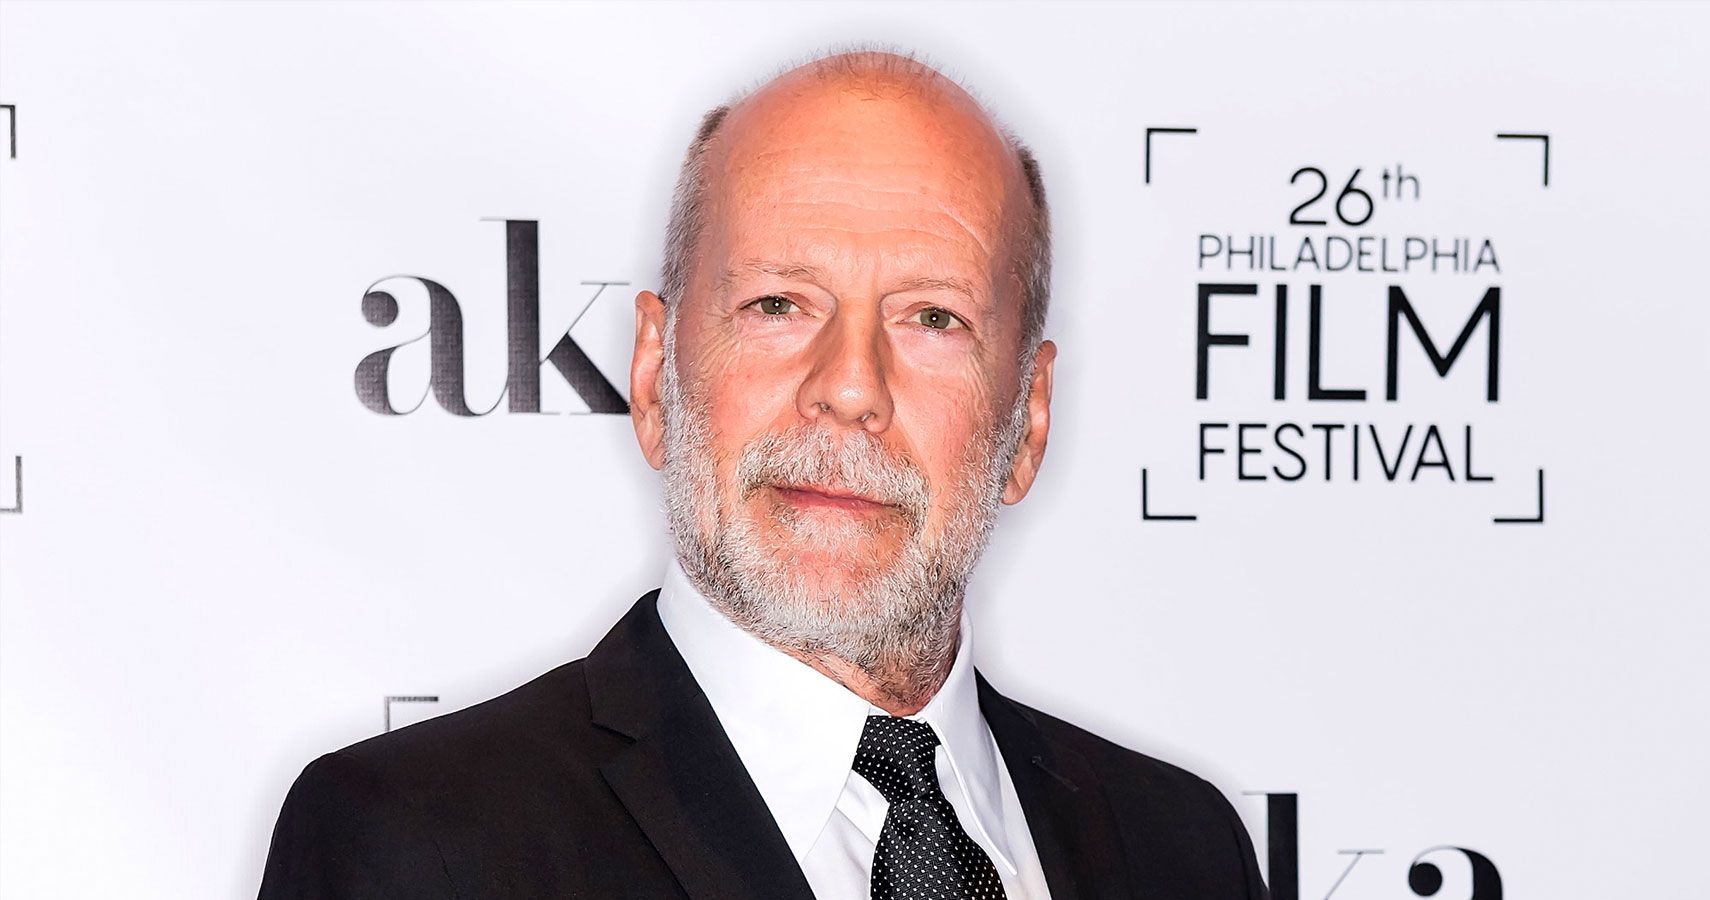  Bruce Willis @ Gilbert Carrasquillo/Getty Images